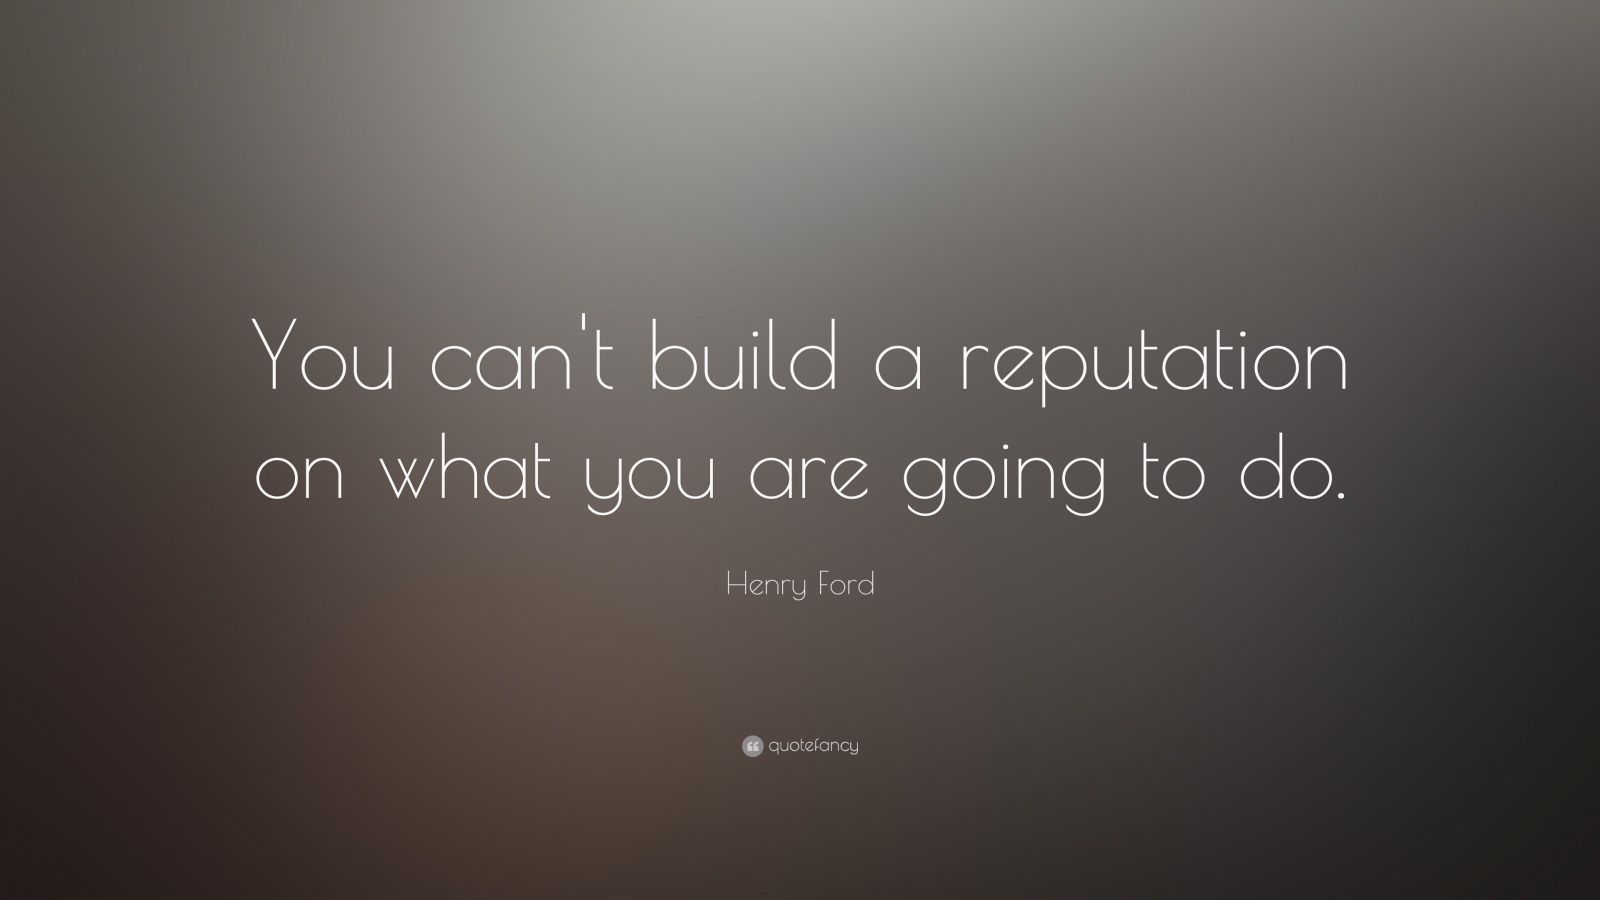 Henry ford quote on reputation #3